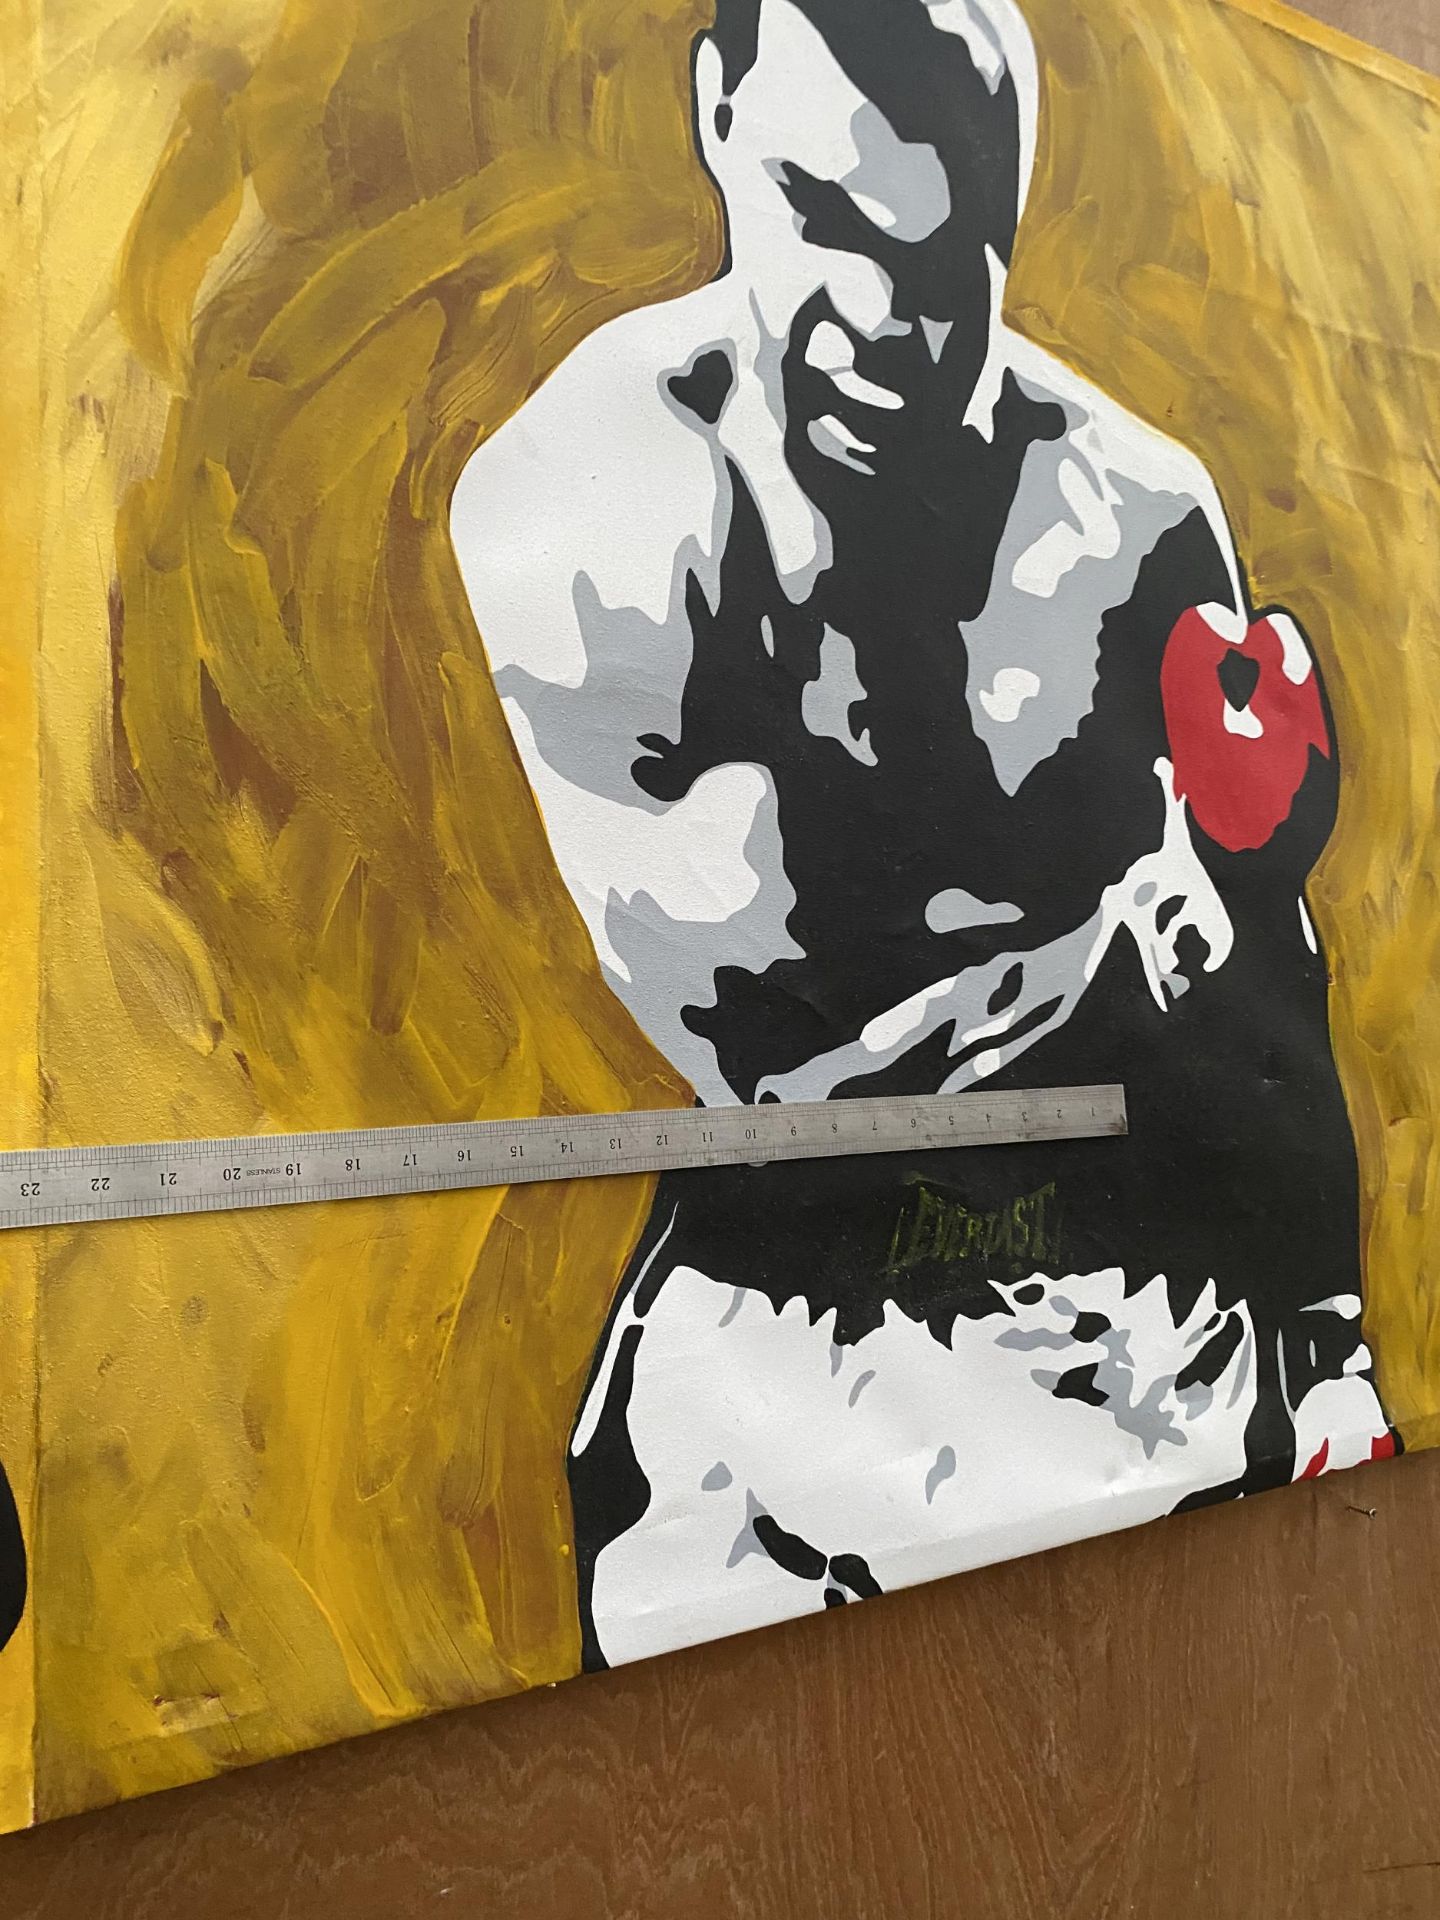 A LARGE CANVAS PRINT OF MUHAMMAD ALI - Image 3 of 3